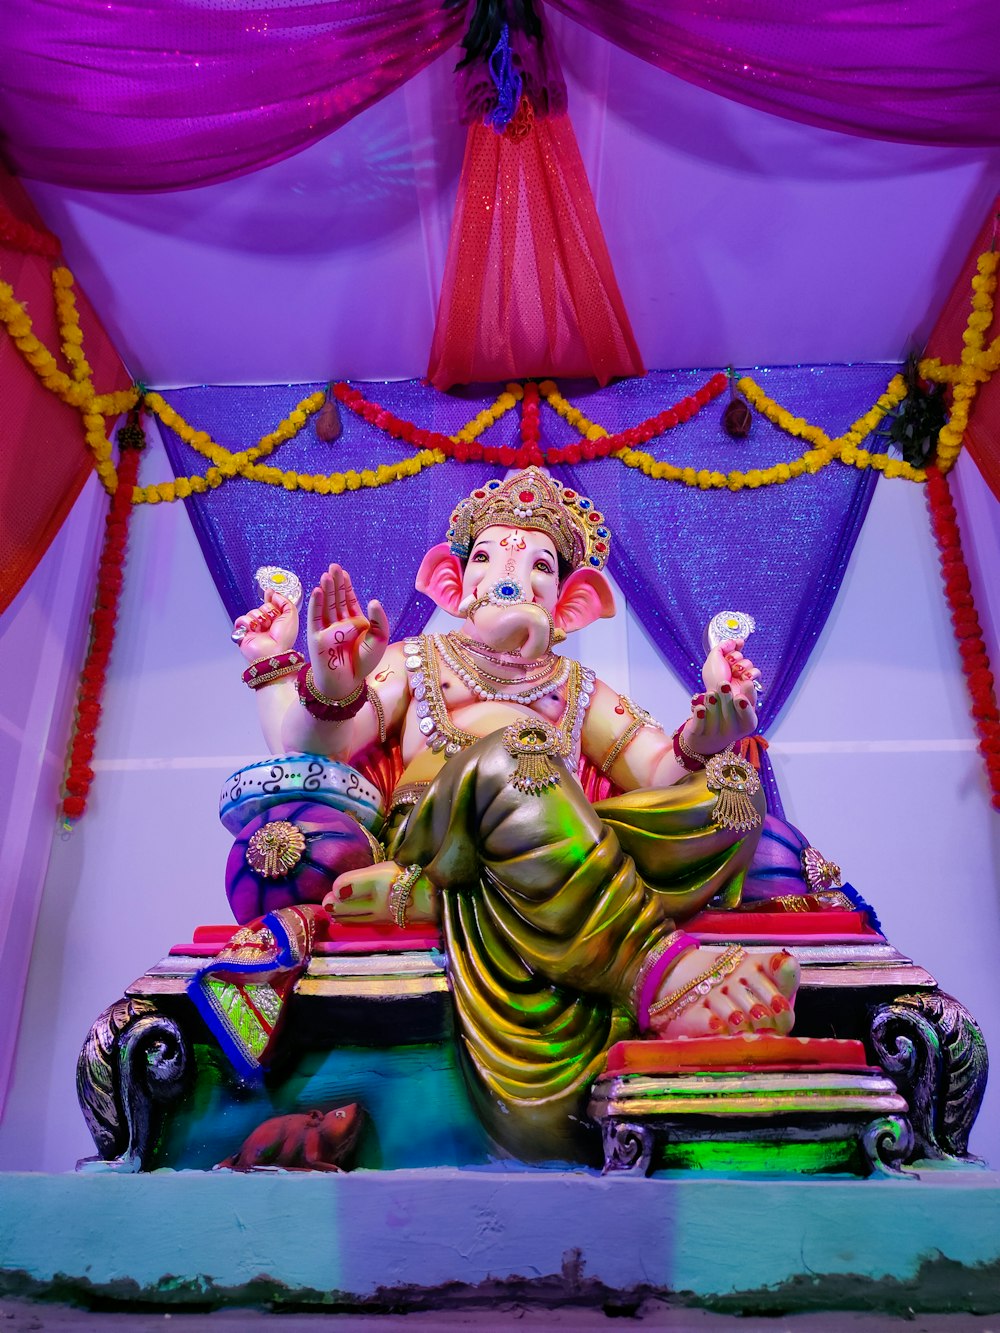 a statue of a person sitting on a throne with a colorful background